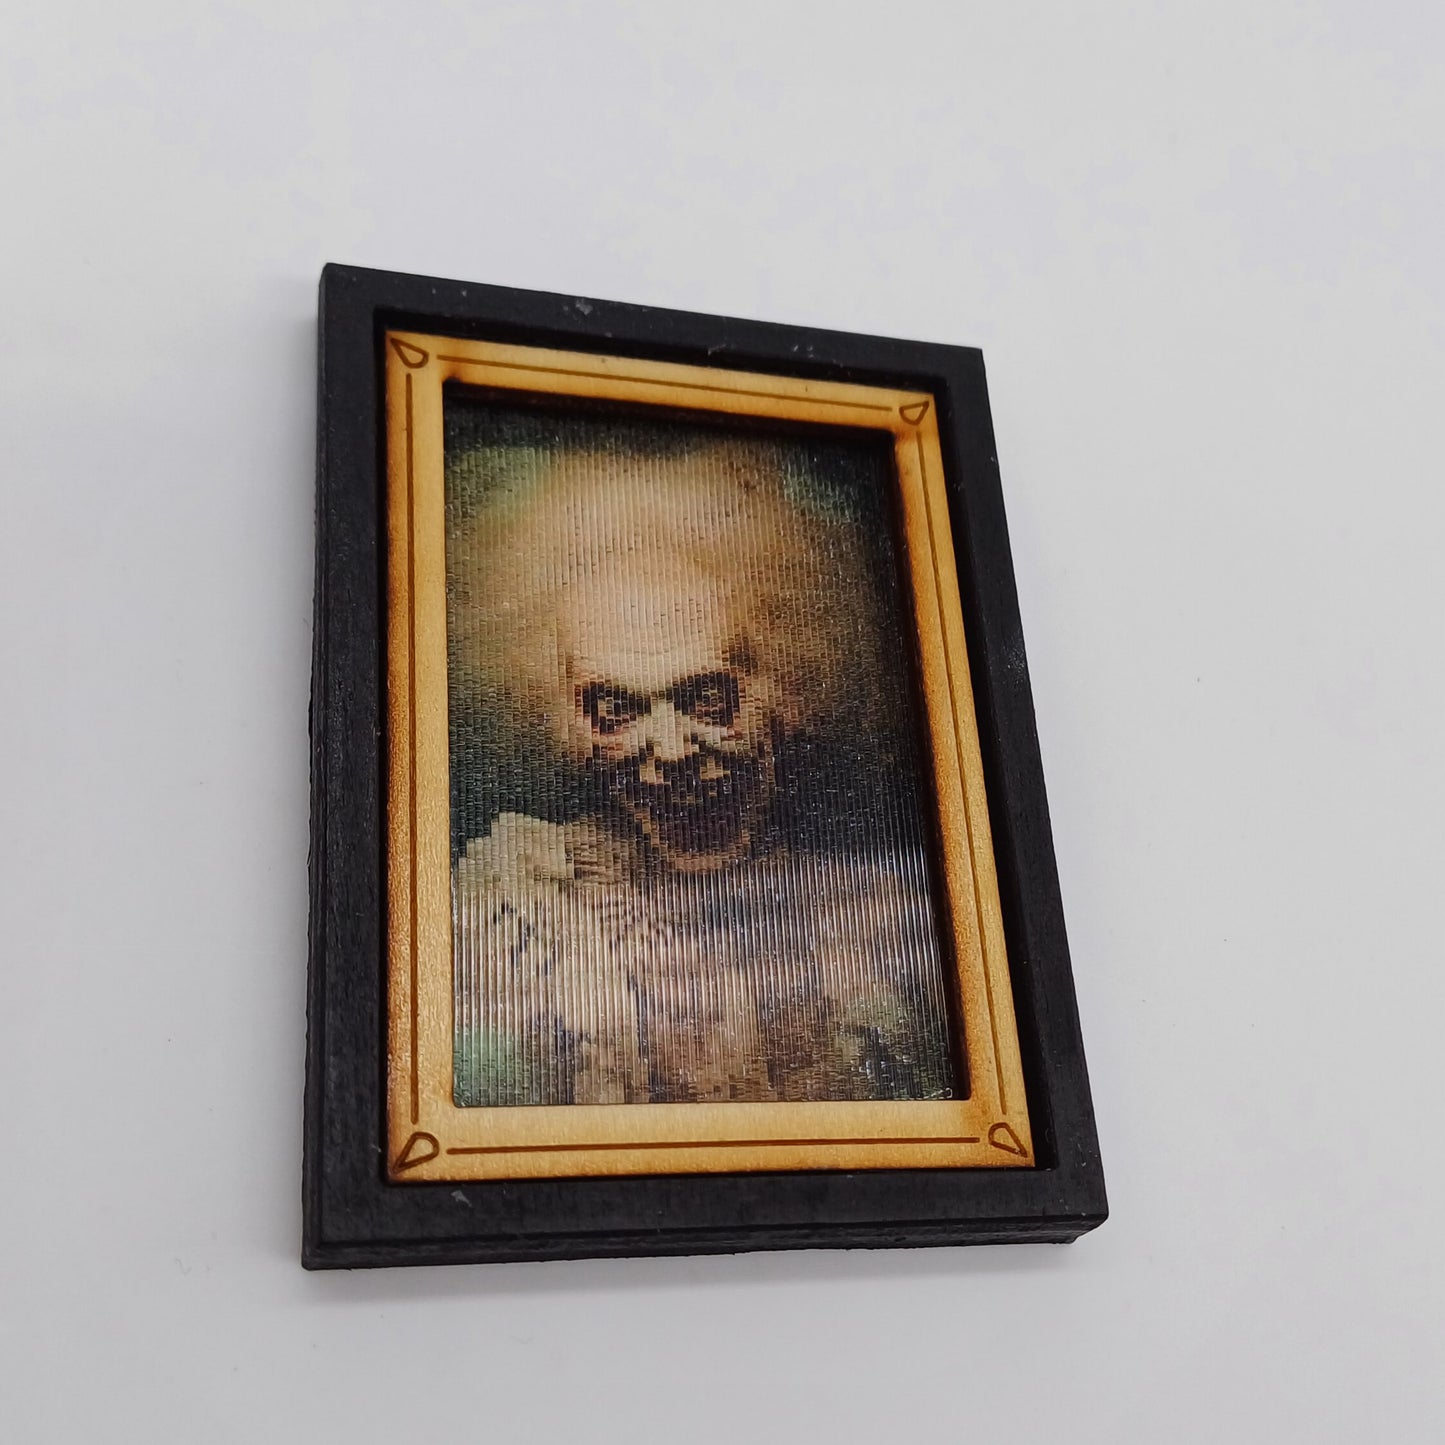 Miniature horror painting with changing image